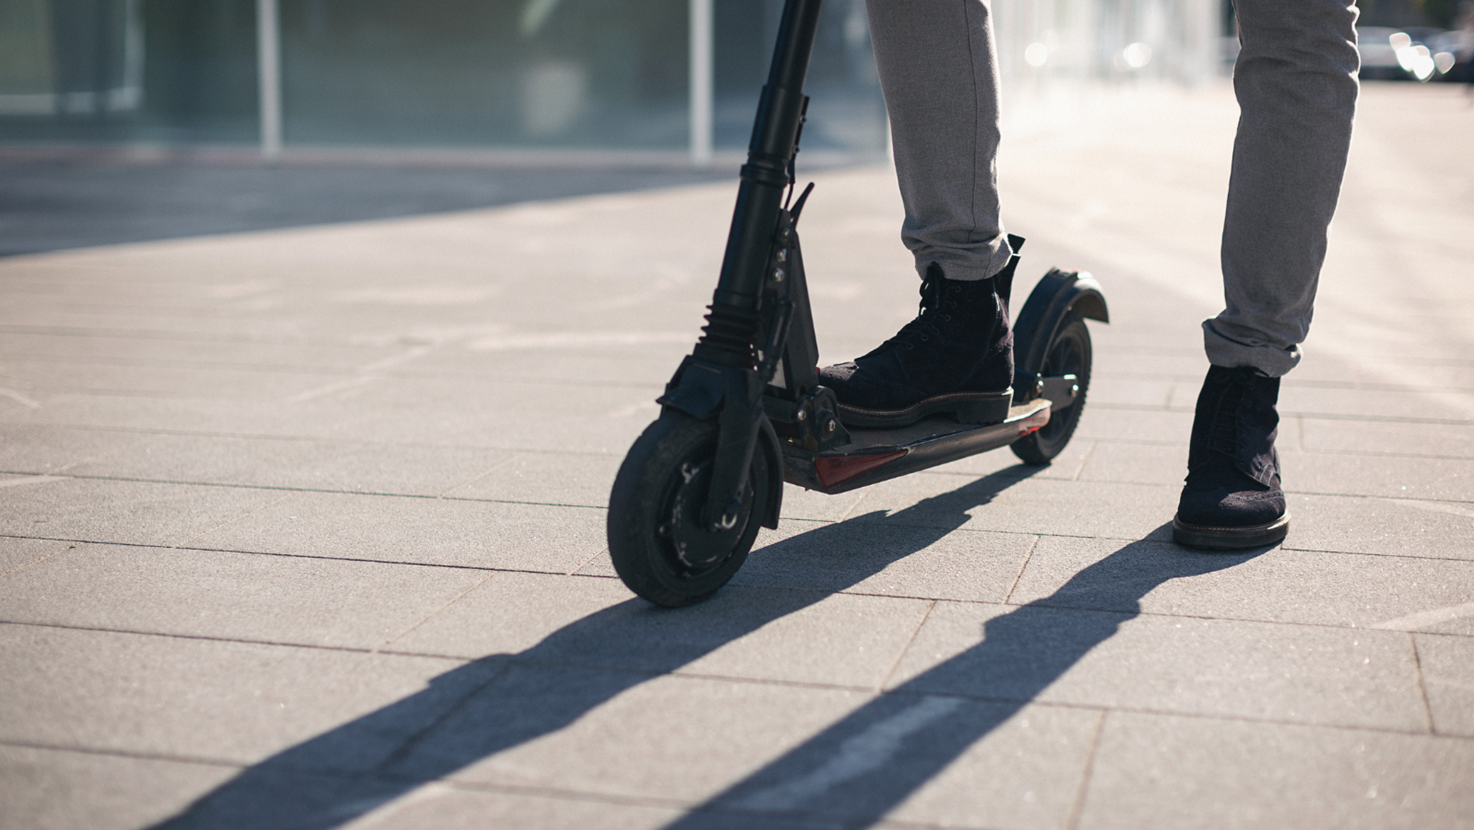 PCC welcomes Lincolnshire Police's warnings about e-scooters